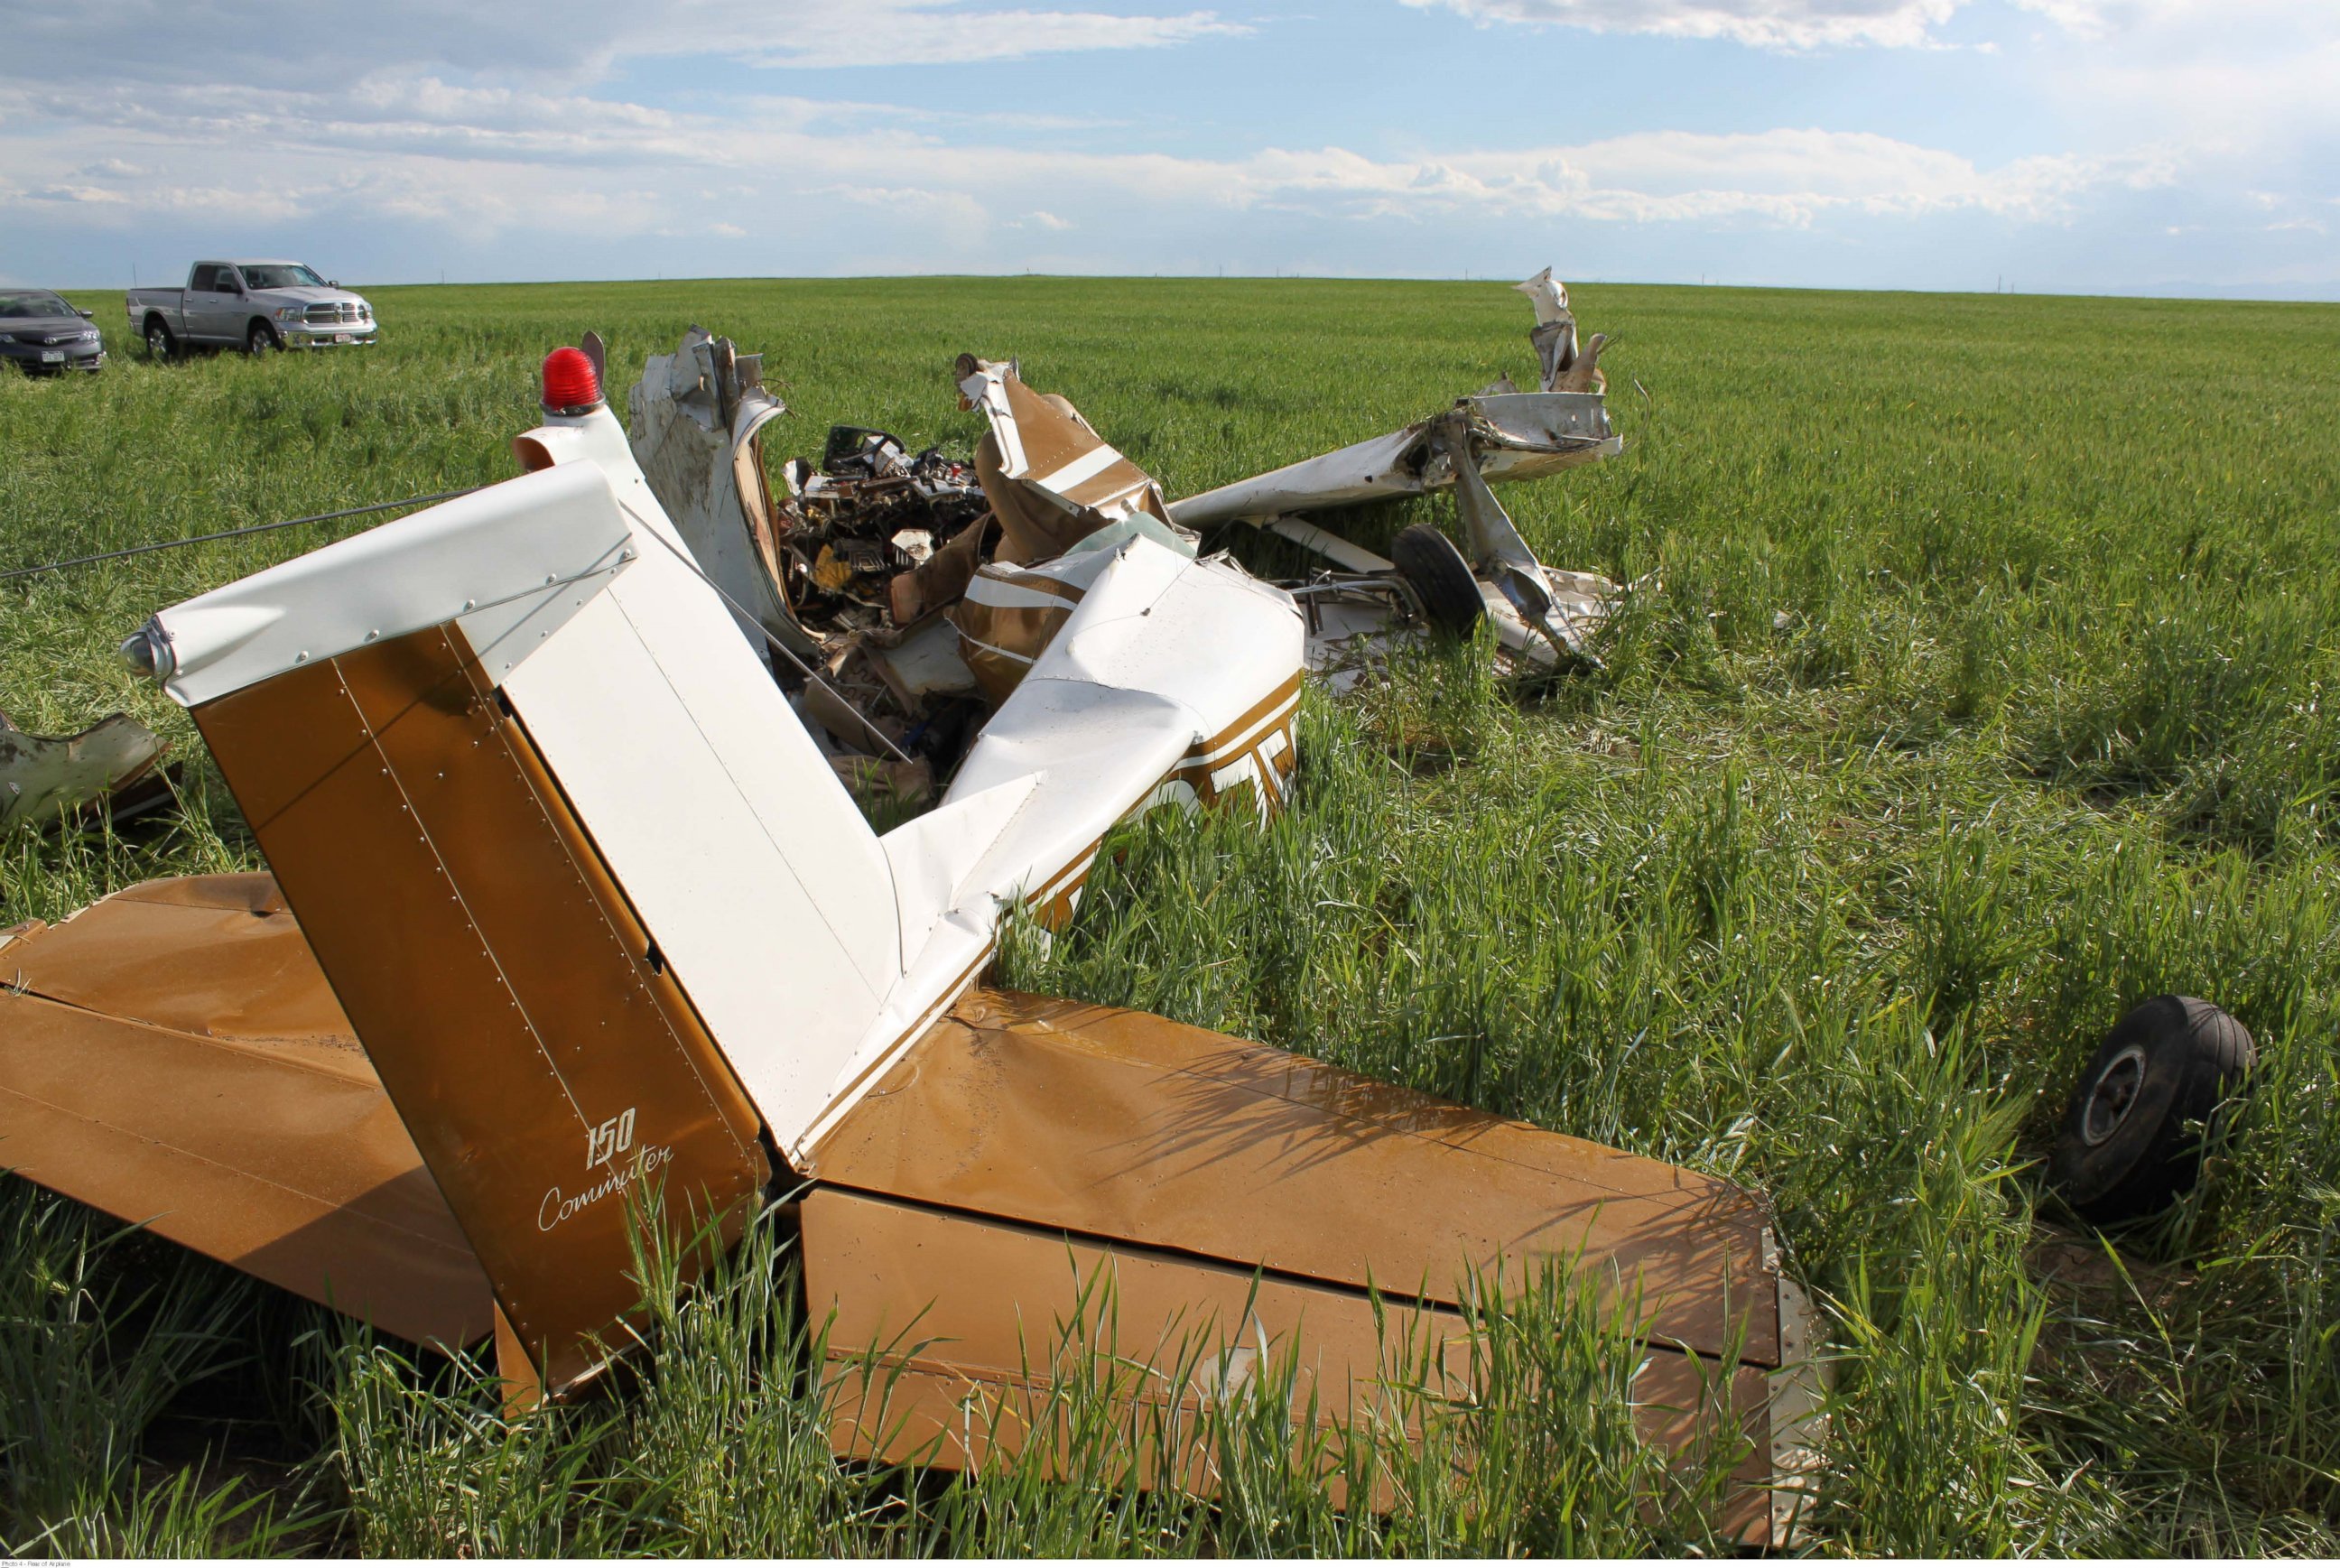 PHOTO: The NTSB has released information about this May 2014 crash near an airport in Watkins, CO and they mentioned how the pilot was taking selfies throughout the flight. 
